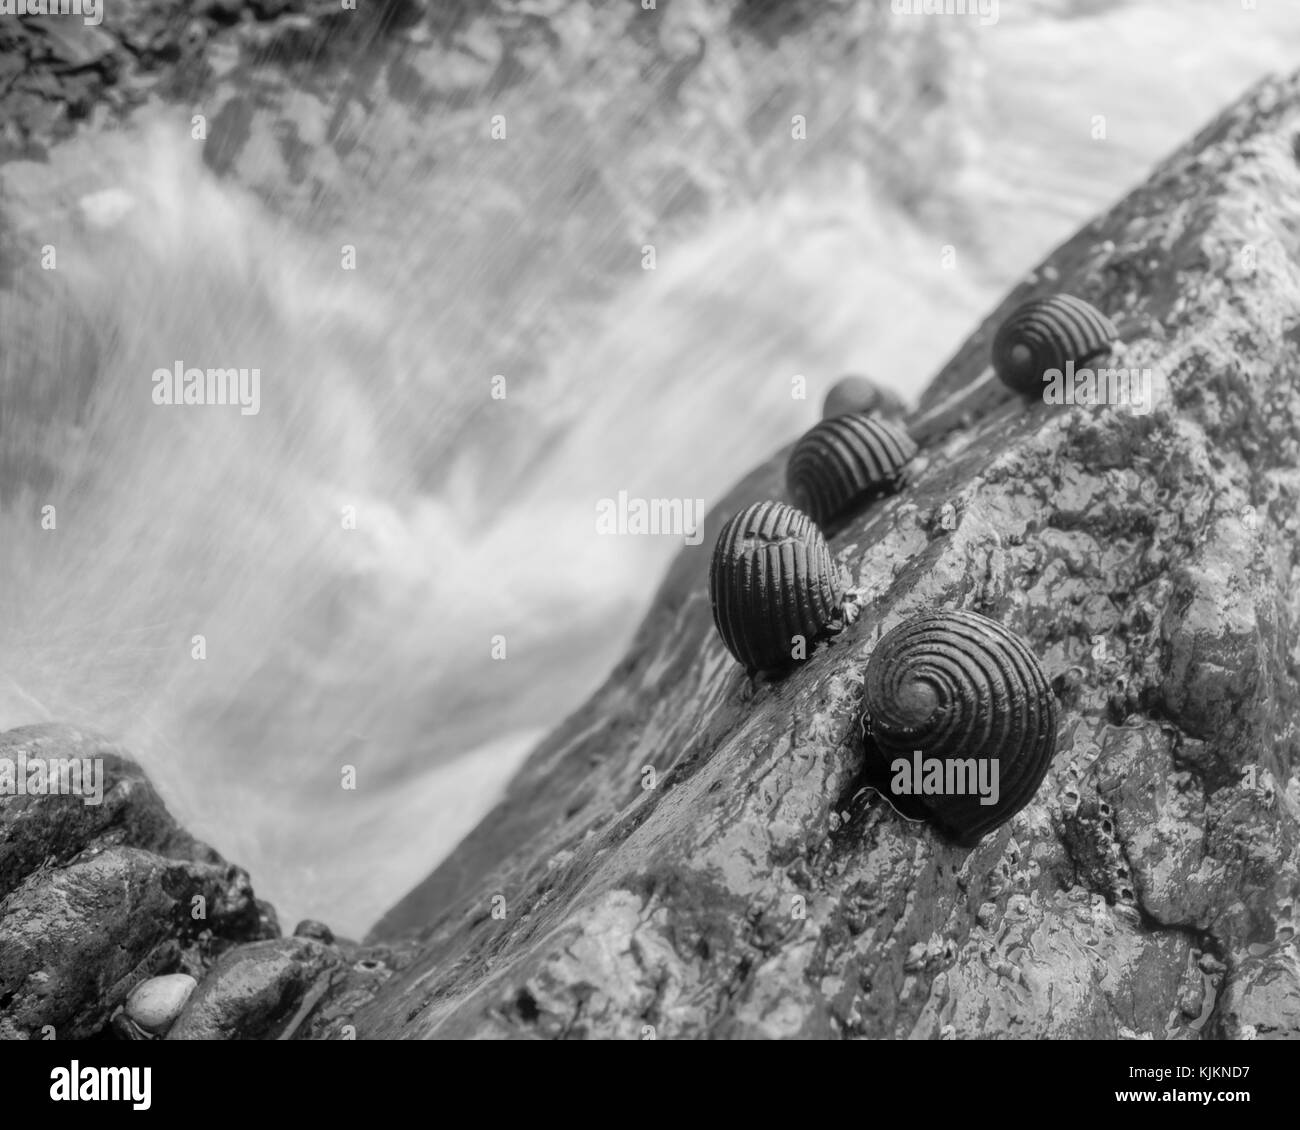 Sea snails sitting on a rock as the waves are crashing into it; picture taken at Koh Lanta, Thailand. Stock Photo